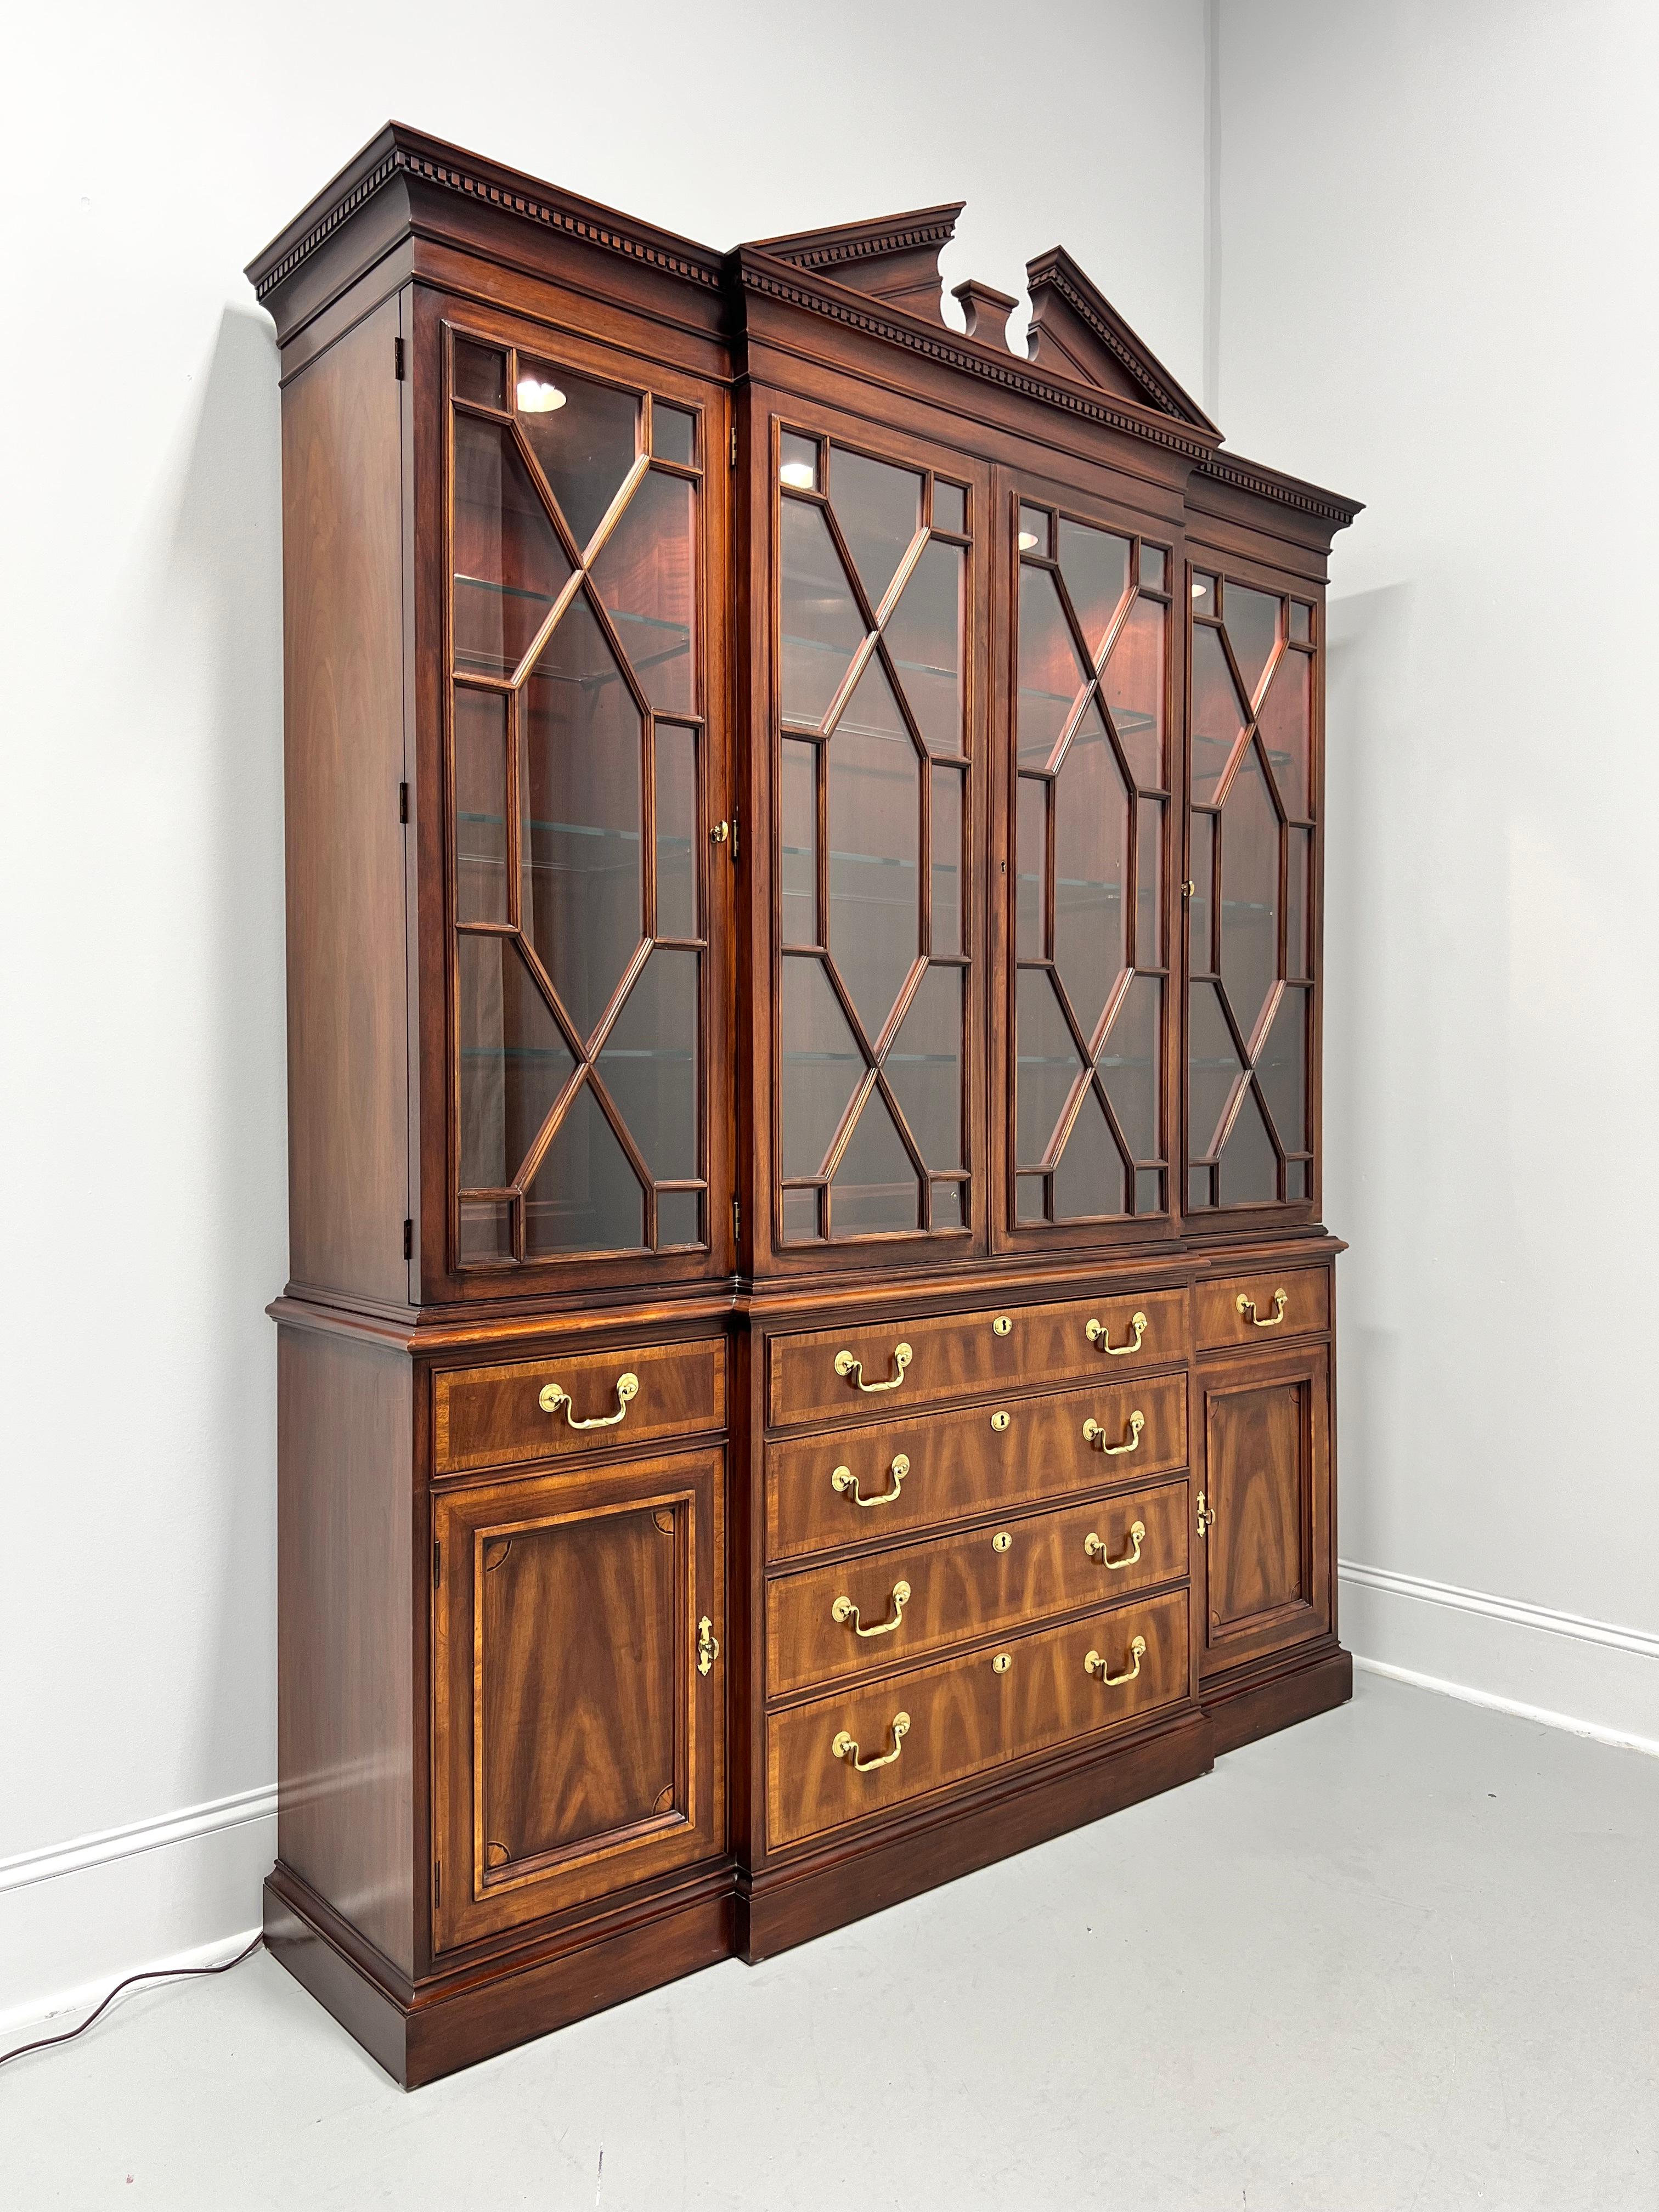 A Chippendale style breakfront china cabinet by White Furniture. Mahogany with inlays, banded door & drawer fronts, brass hardware, pediment to the top with crown & dentil molding, glass doors with fretwork panes, ogee edge to top of lower cabinet,